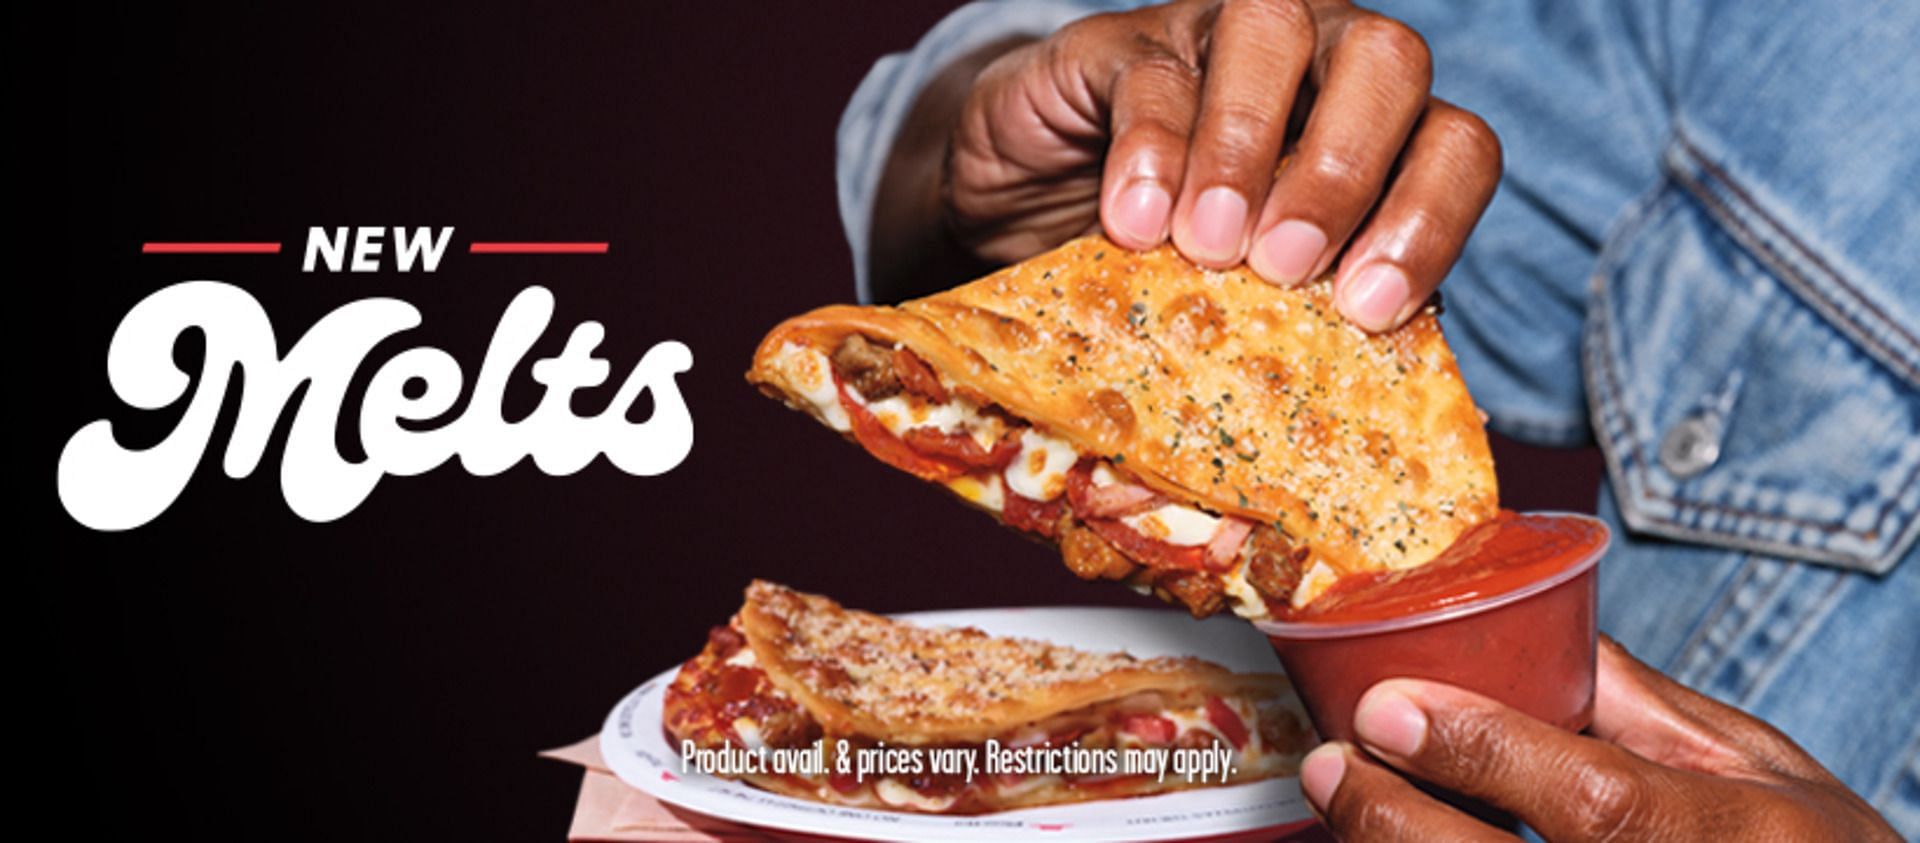 Pizza Hut Melts: Calories, price, and more revealed as the dish “not for  sharing” takes Twitter by storm